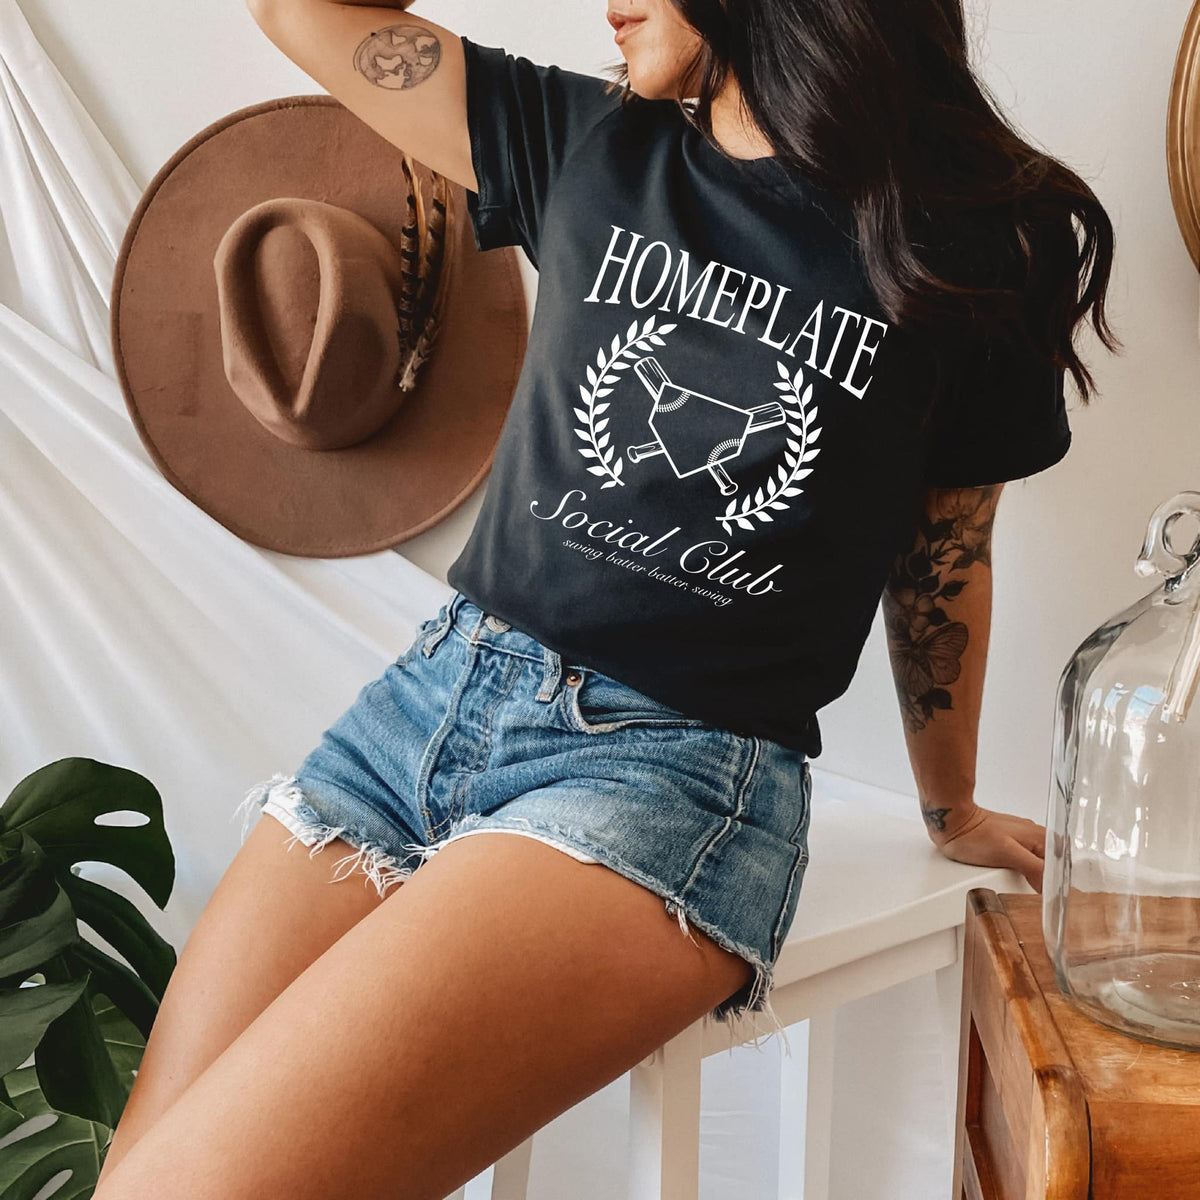 Homeplate Social Club GRAPHIC TEE - ALLOW 7 DAYS TO PROCESS + SHIP TIME